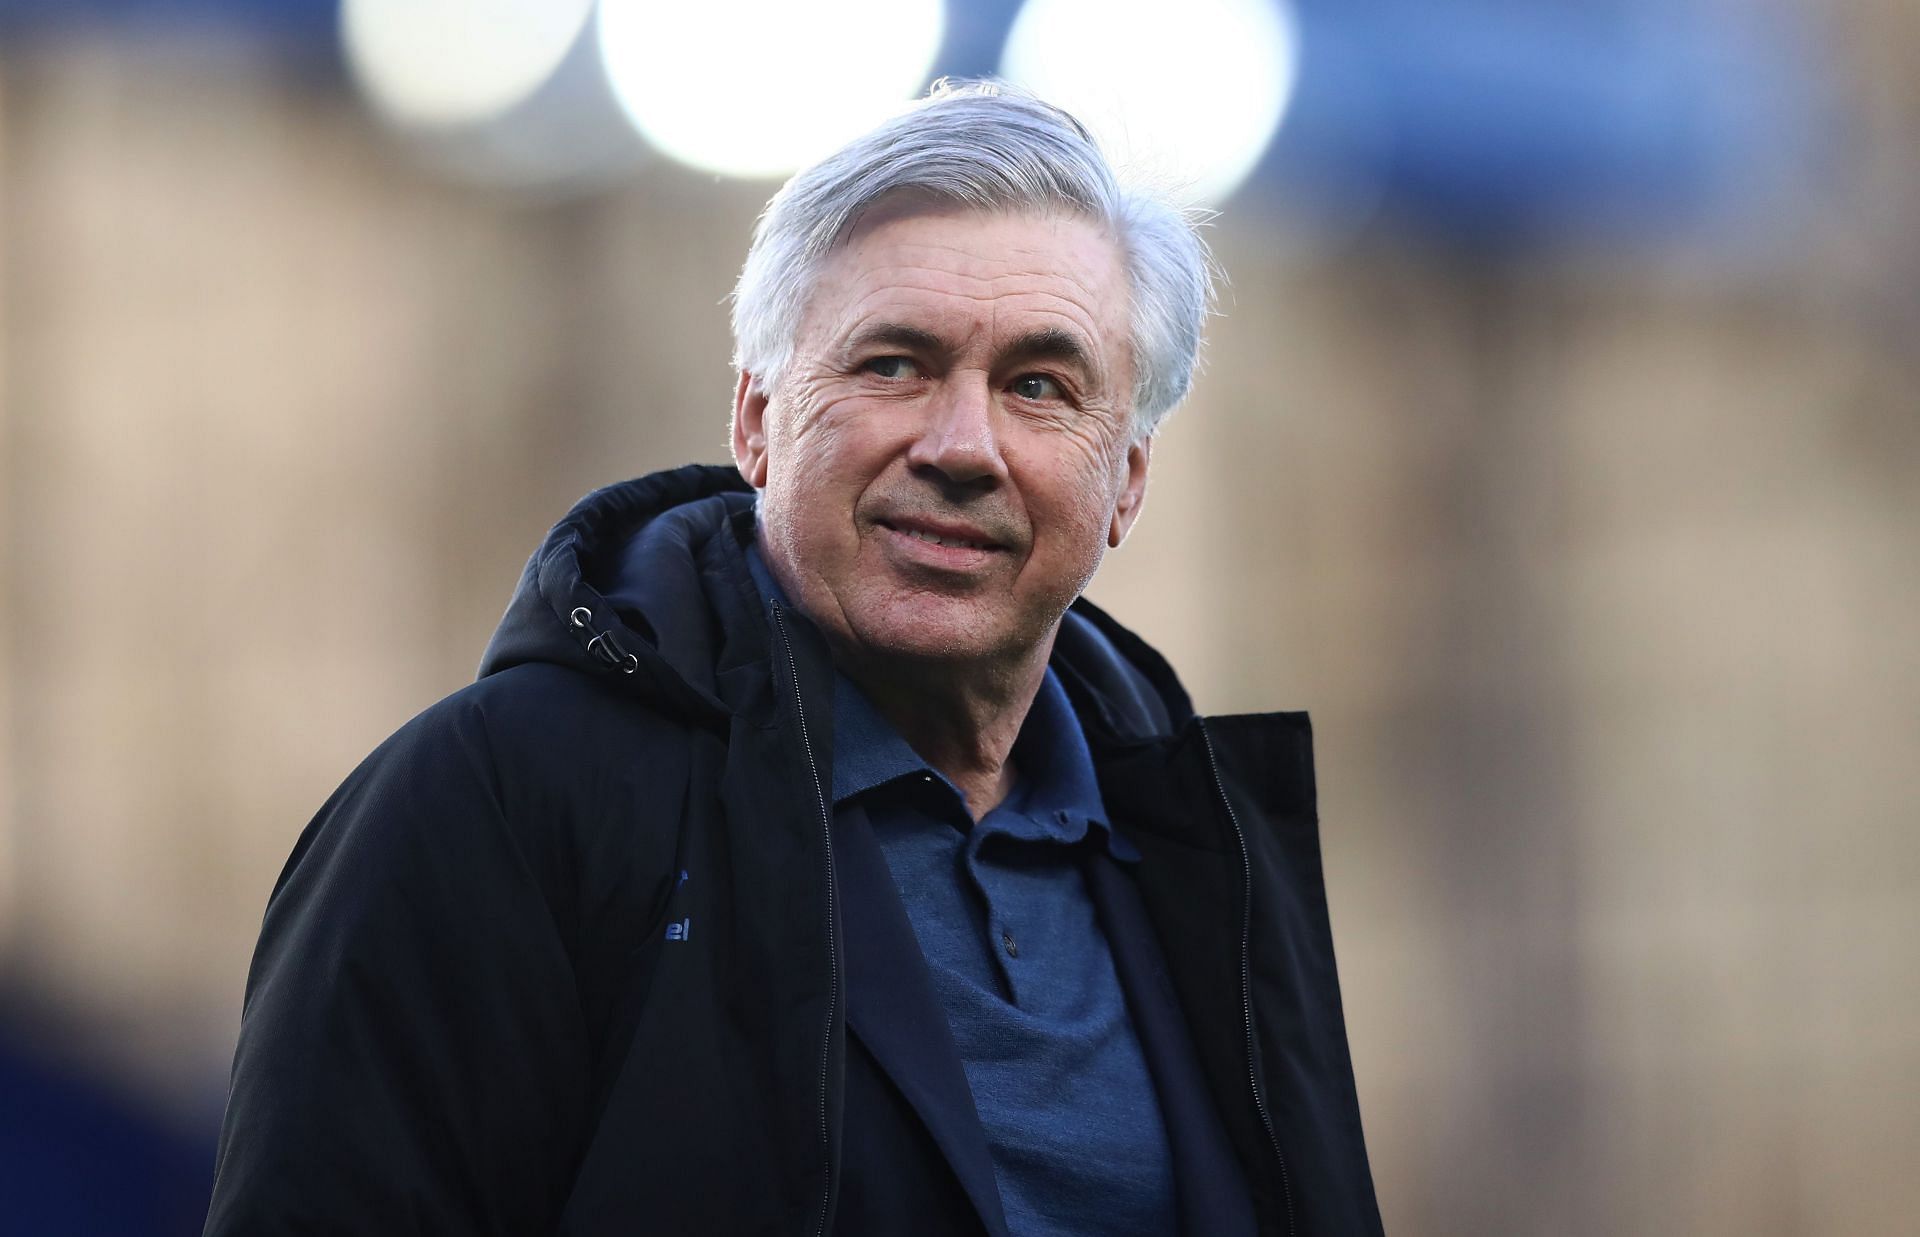 Carlo Ancelotti is widely known for his successes in the UEFA Champions League as a manager.